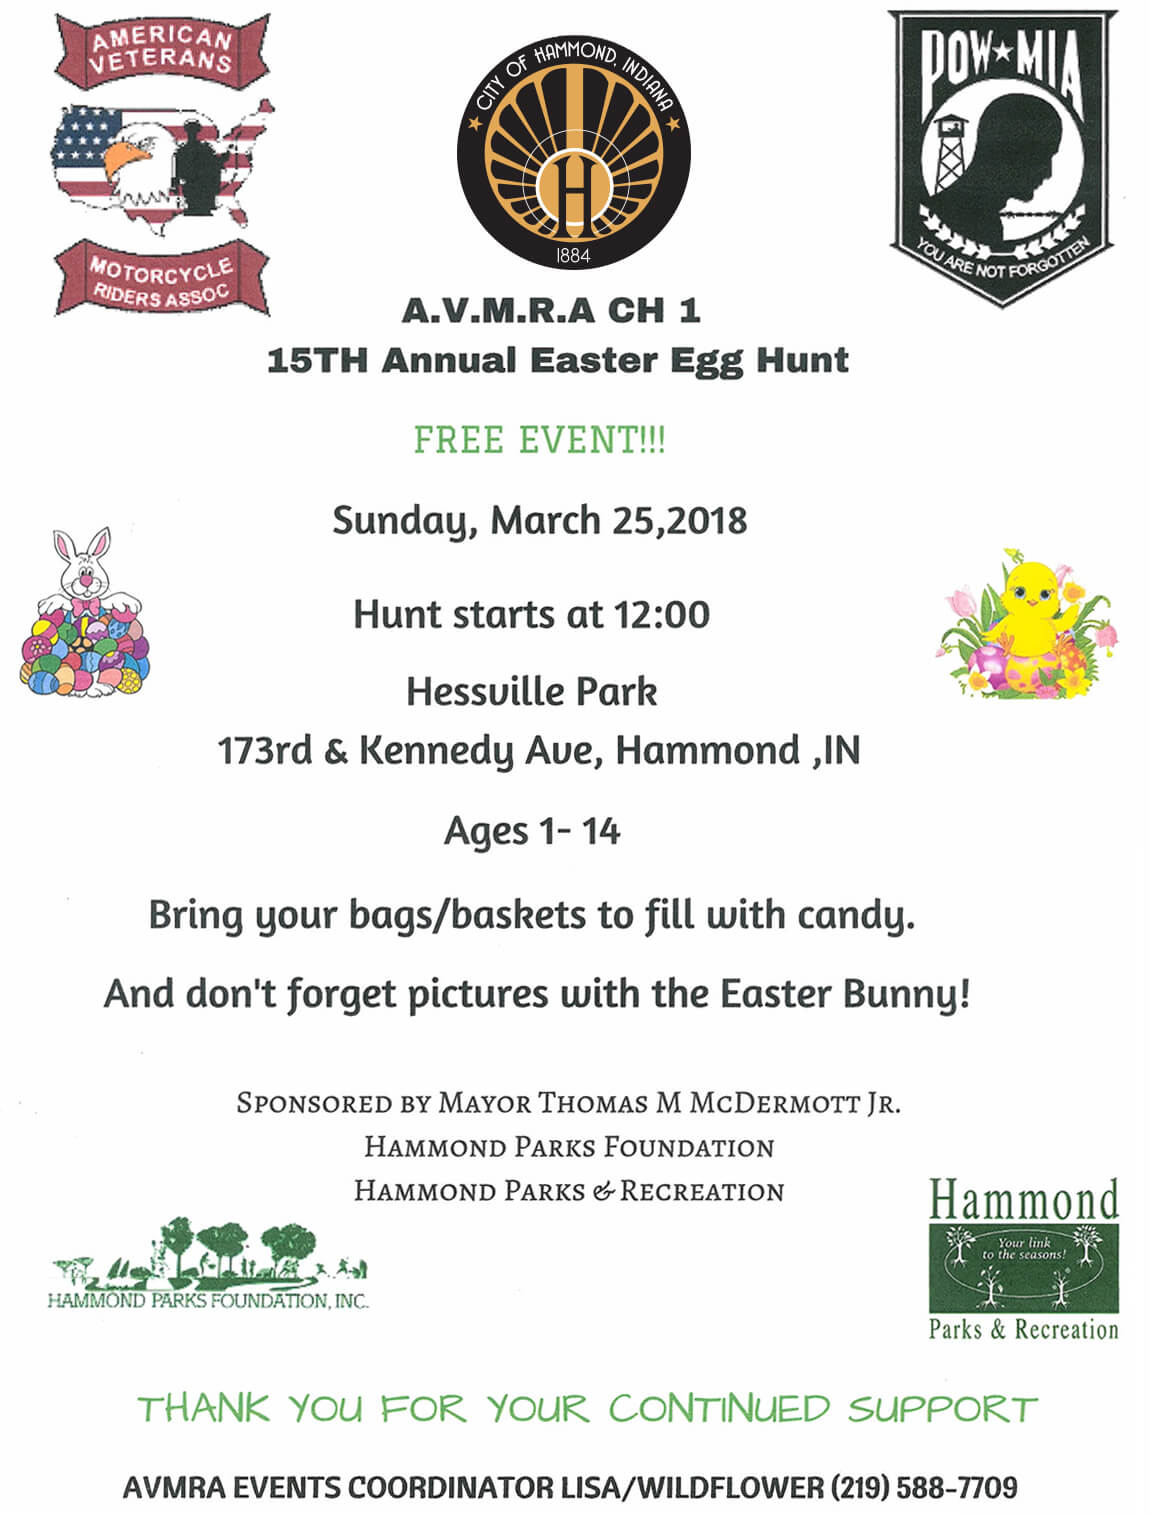 American Veterans Motorcycle Riders Association, Hammond Parks & Recreation and Hammond Parks Foundation invite you to attend our 15th Annual Easter Egg Hunt.